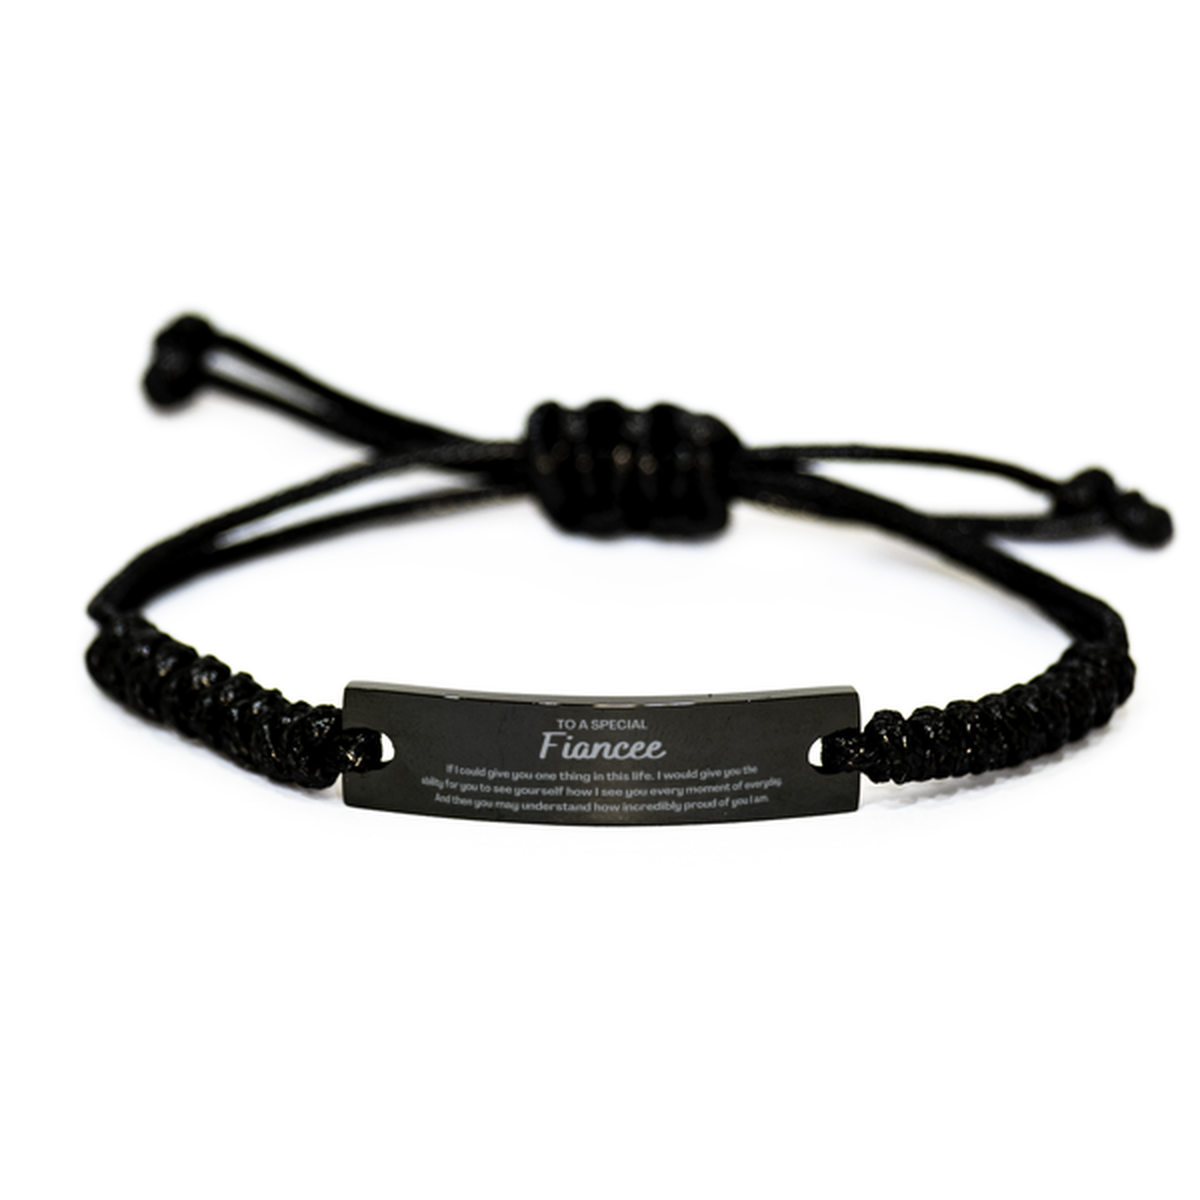 To My Fiancee Black Rope Bracelet, Gifts For Fiancee Engraved, Inspirational Gifts for Christmas Birthday, Epic Gifts for Fiancee To A Special Fiancee how incredibly proud of you I am